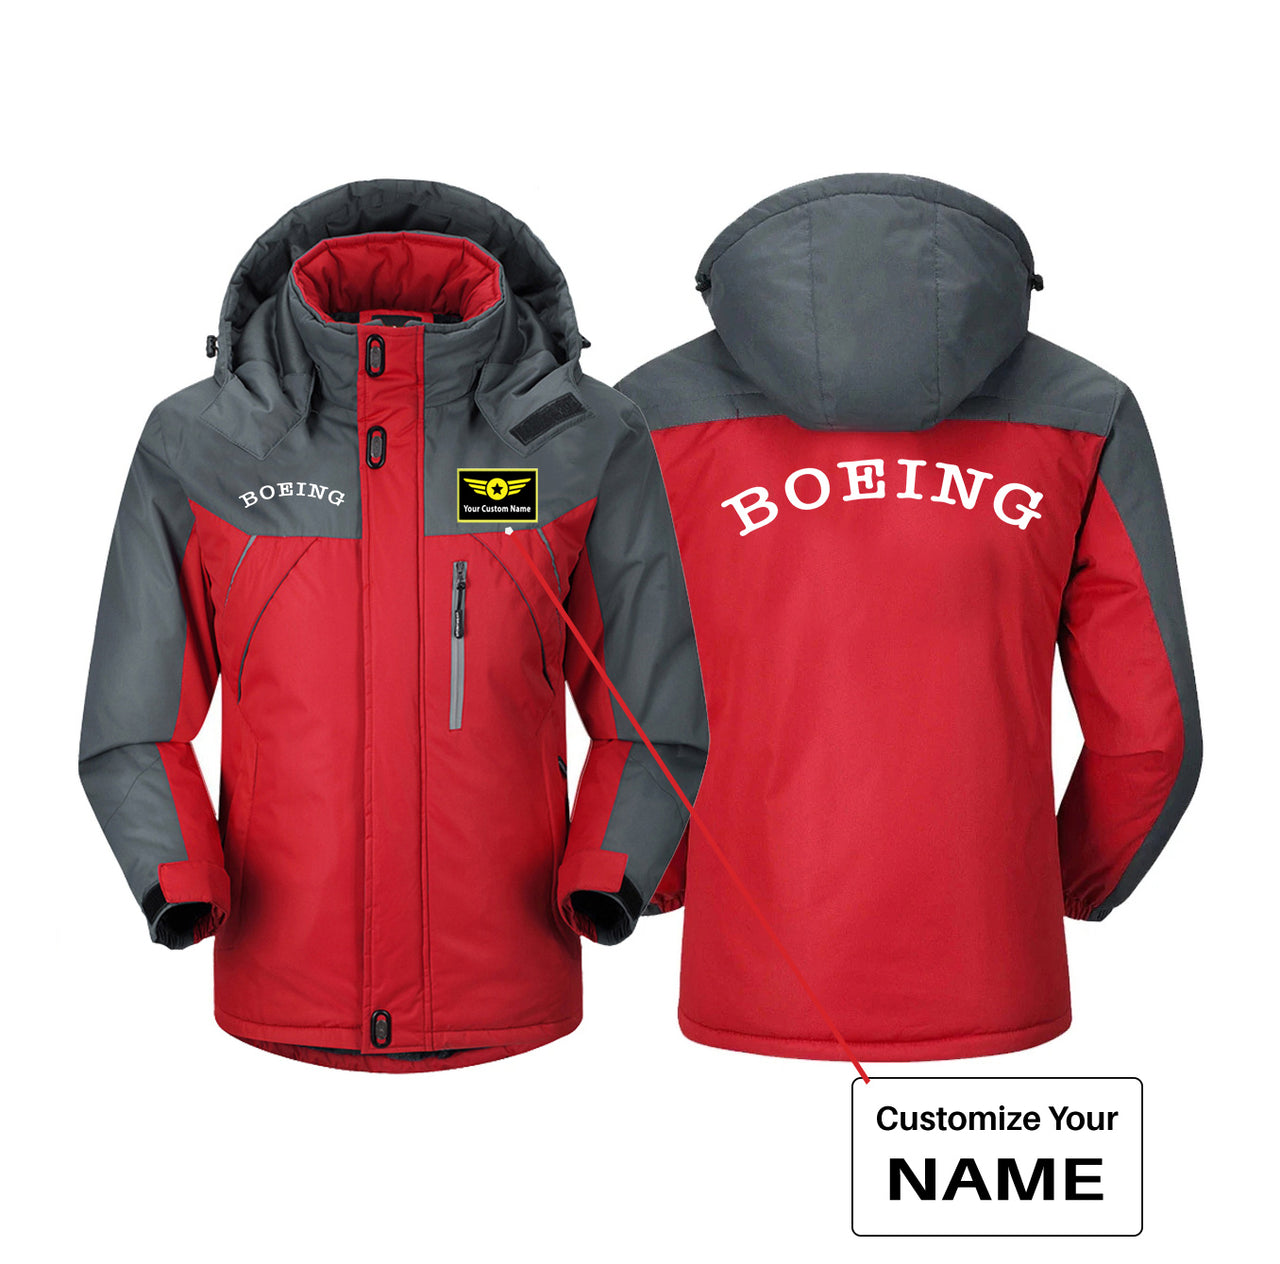 Special BOEING Text Designed Thick Winter Jackets